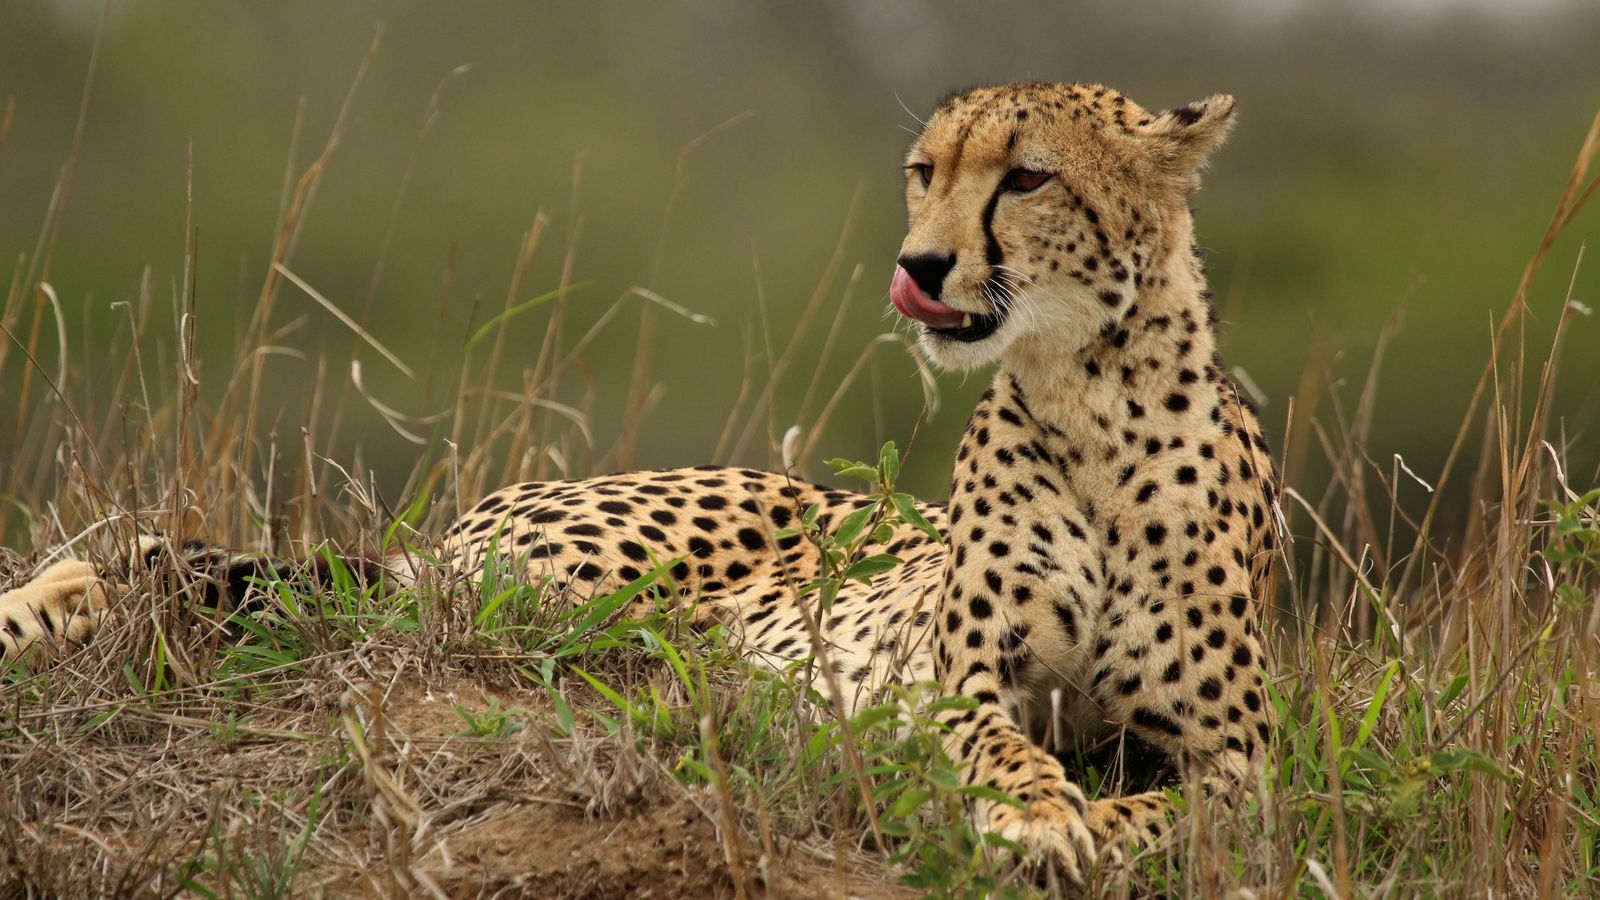 Scientists are in a heated Twitter debate about the 'most beautiful spotted animal'